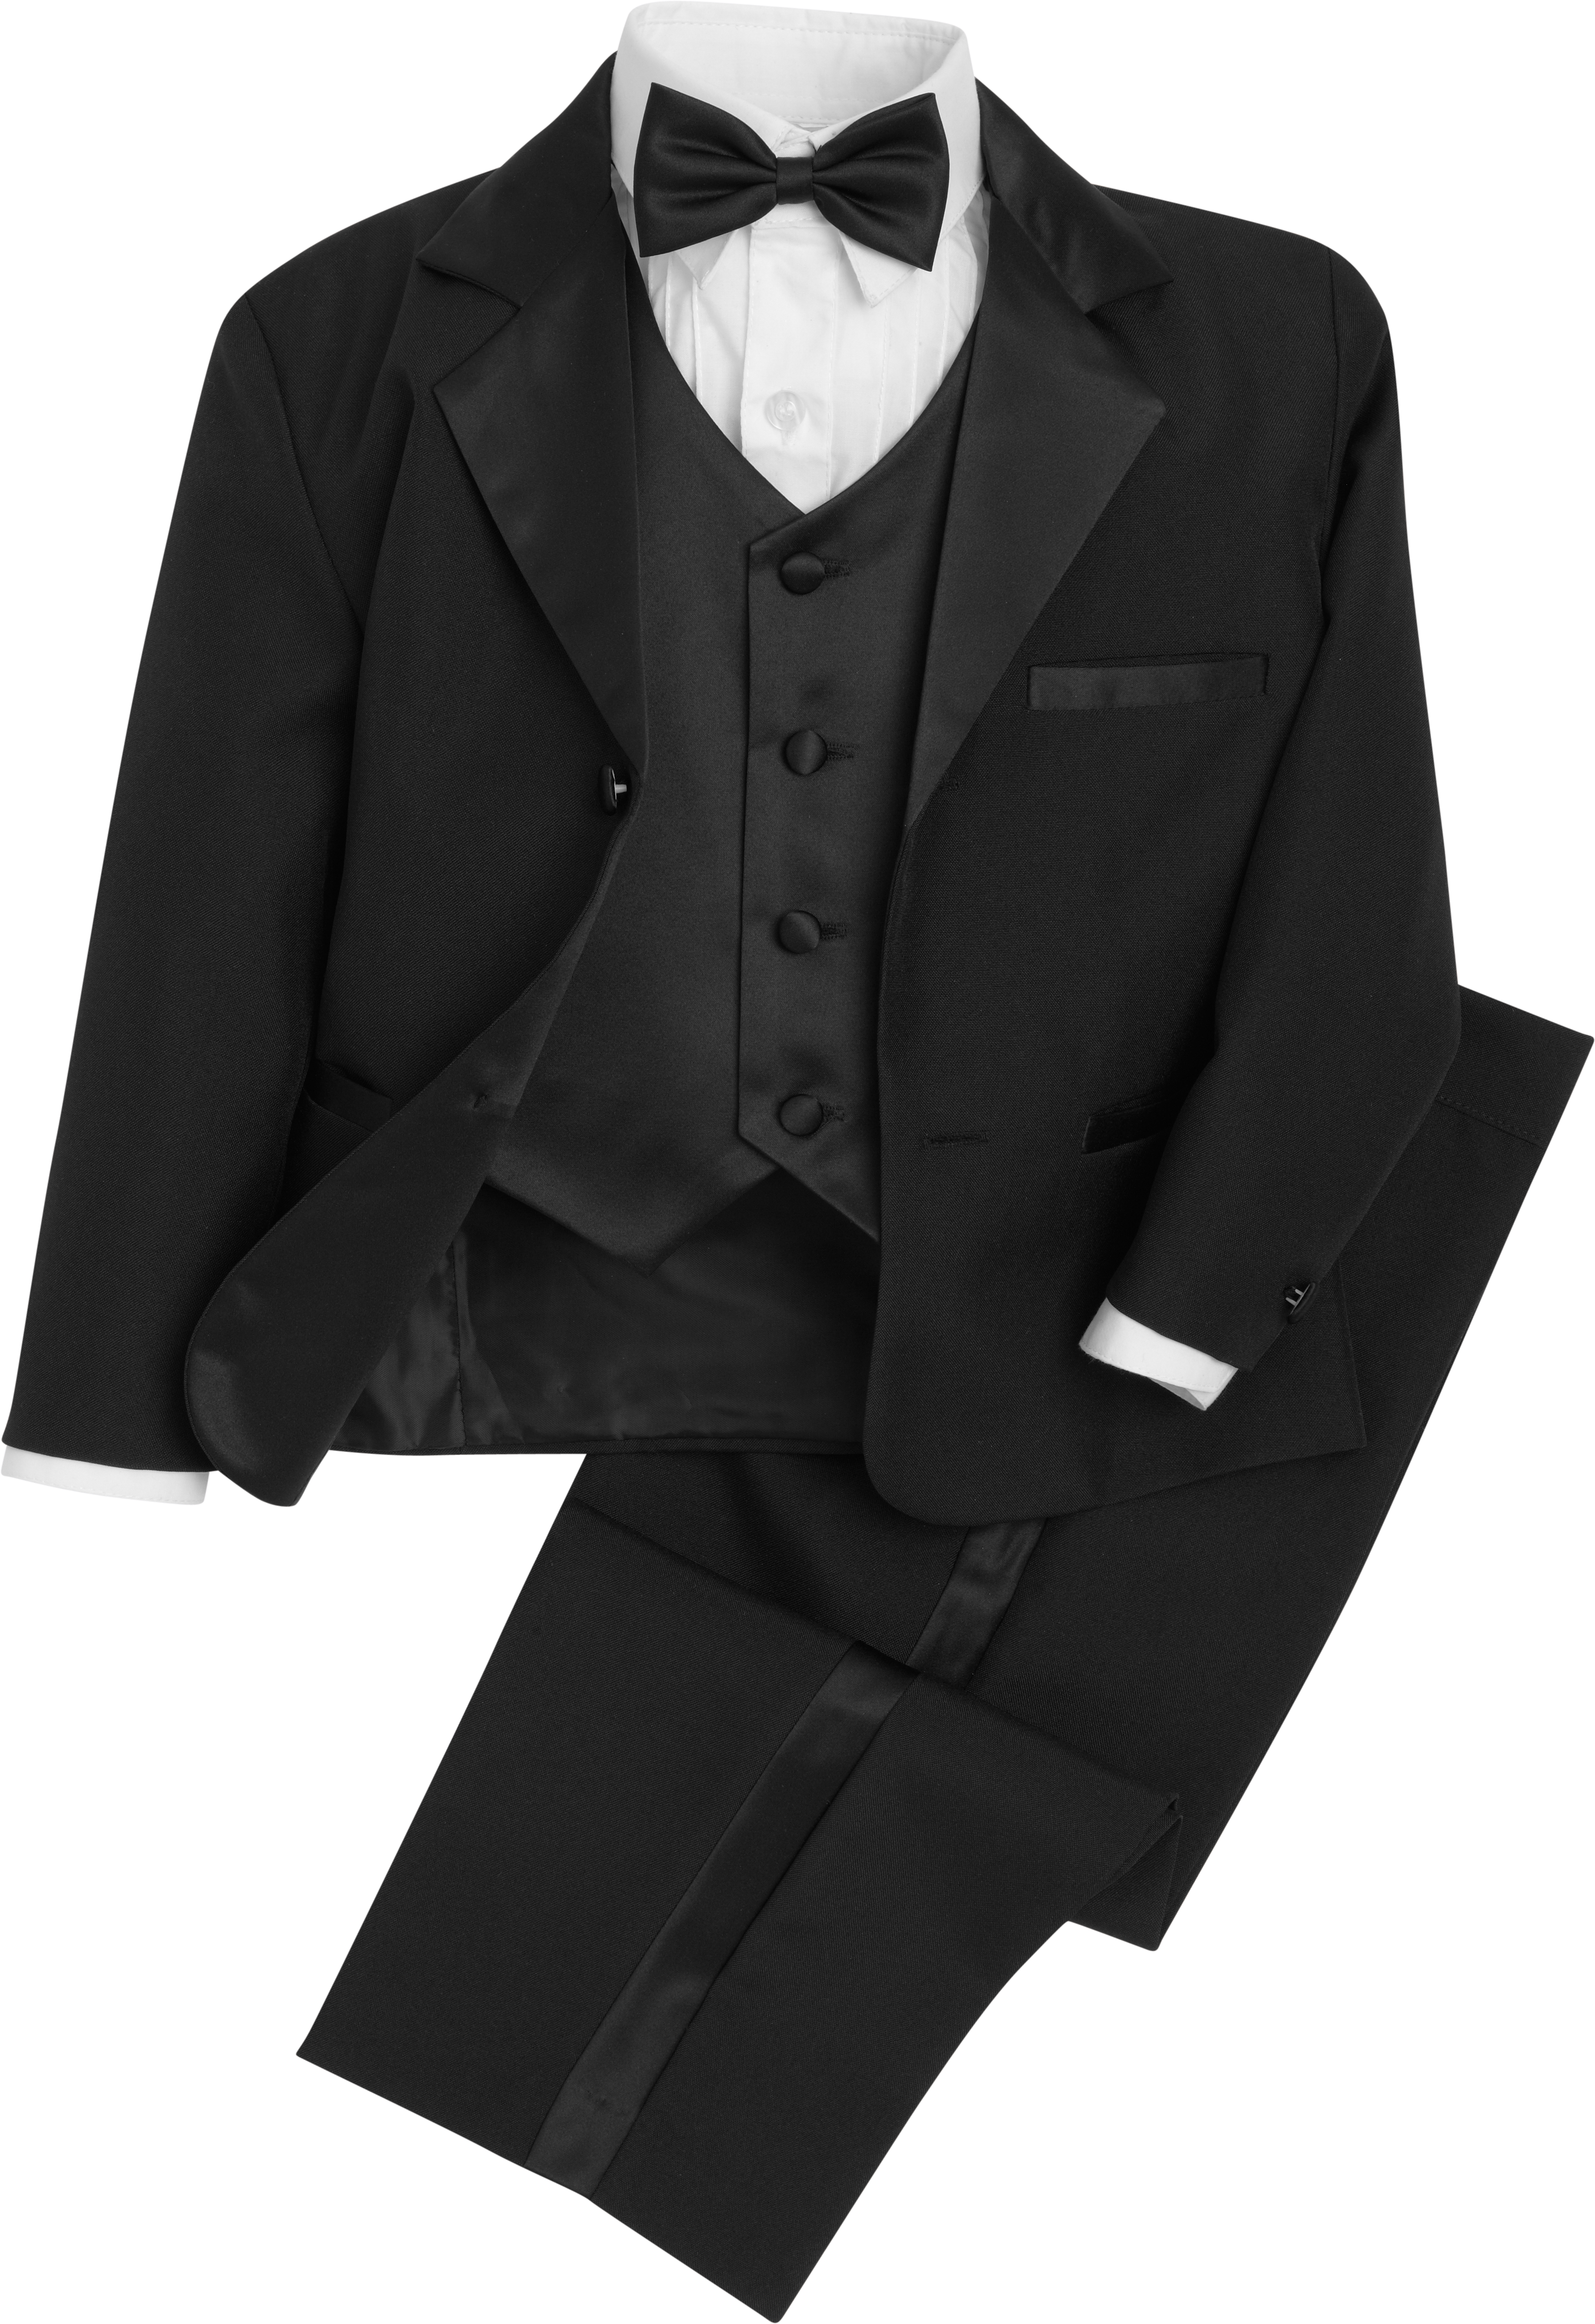 Peanut Butter Collection Black Toddler's Tuxedo